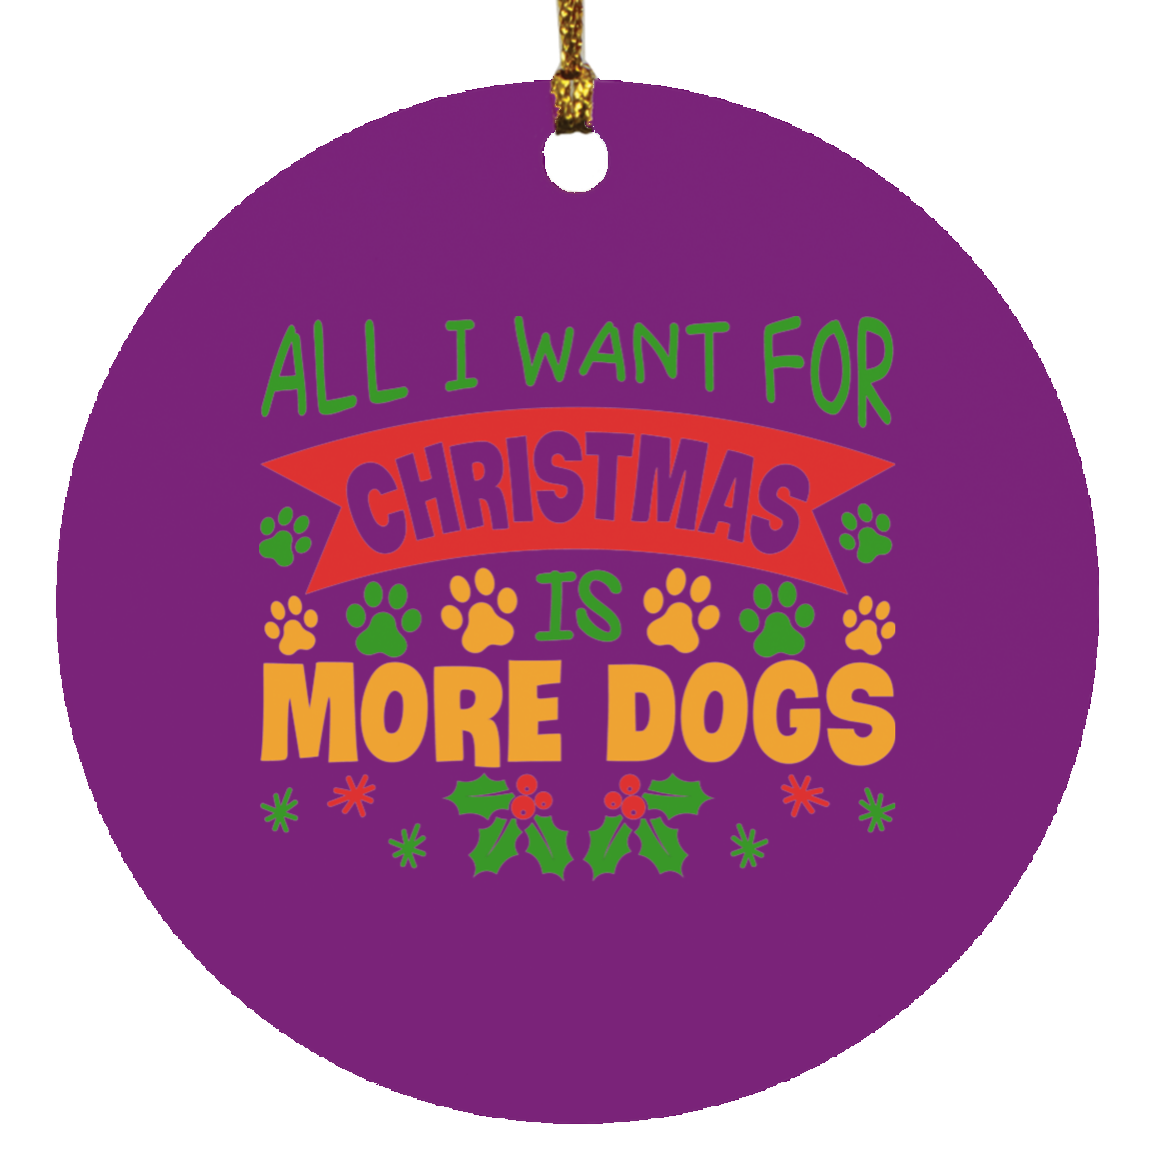 All I Want for Christmas is More Dogs Circle Ornament